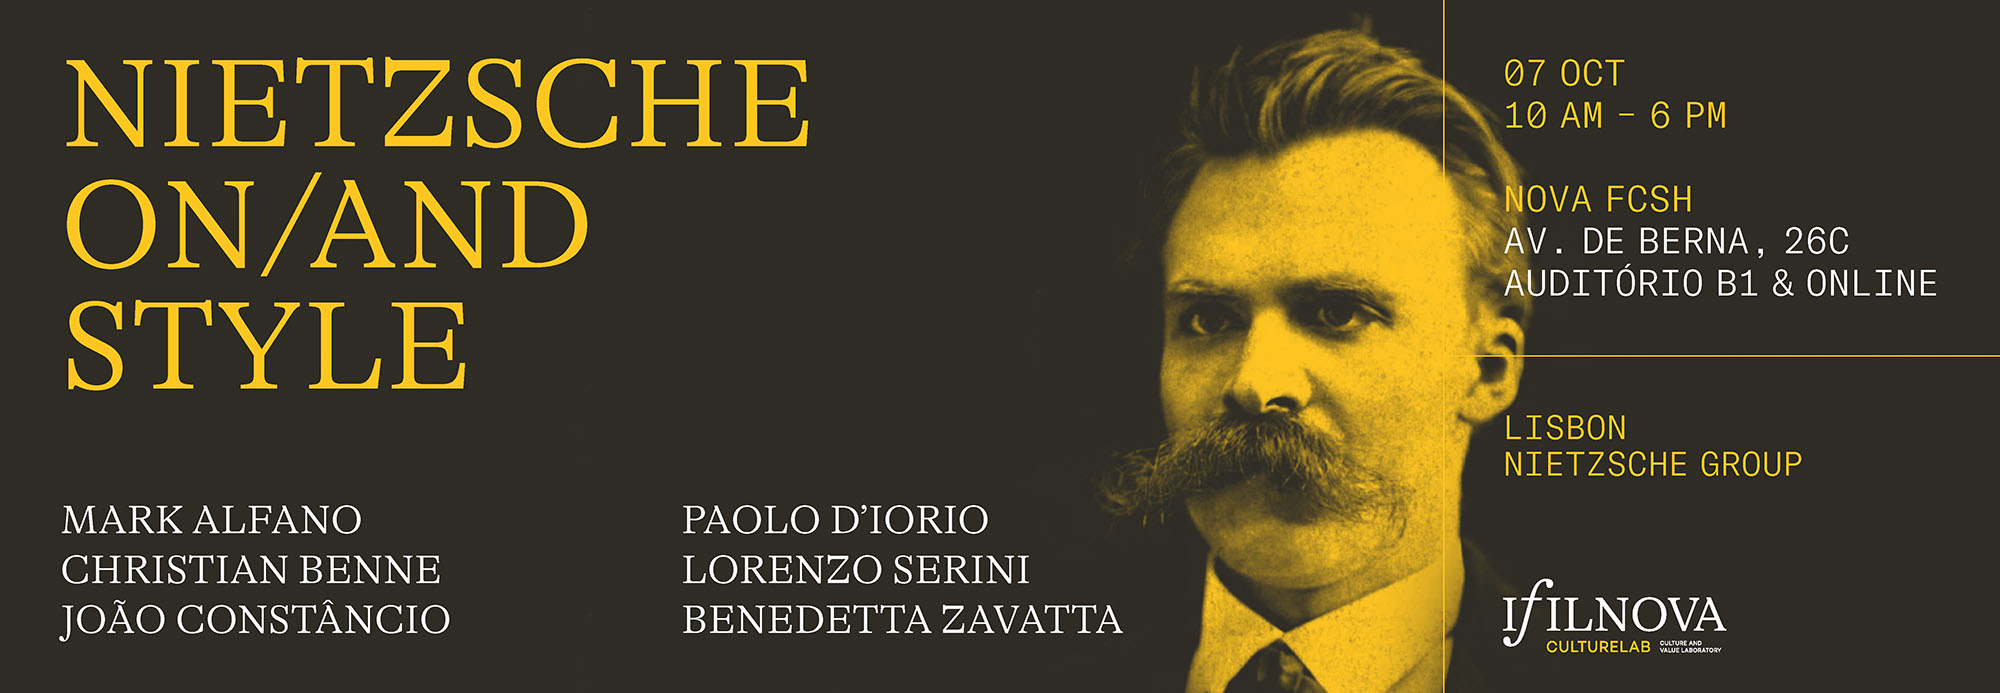 nietzsche on and style banner